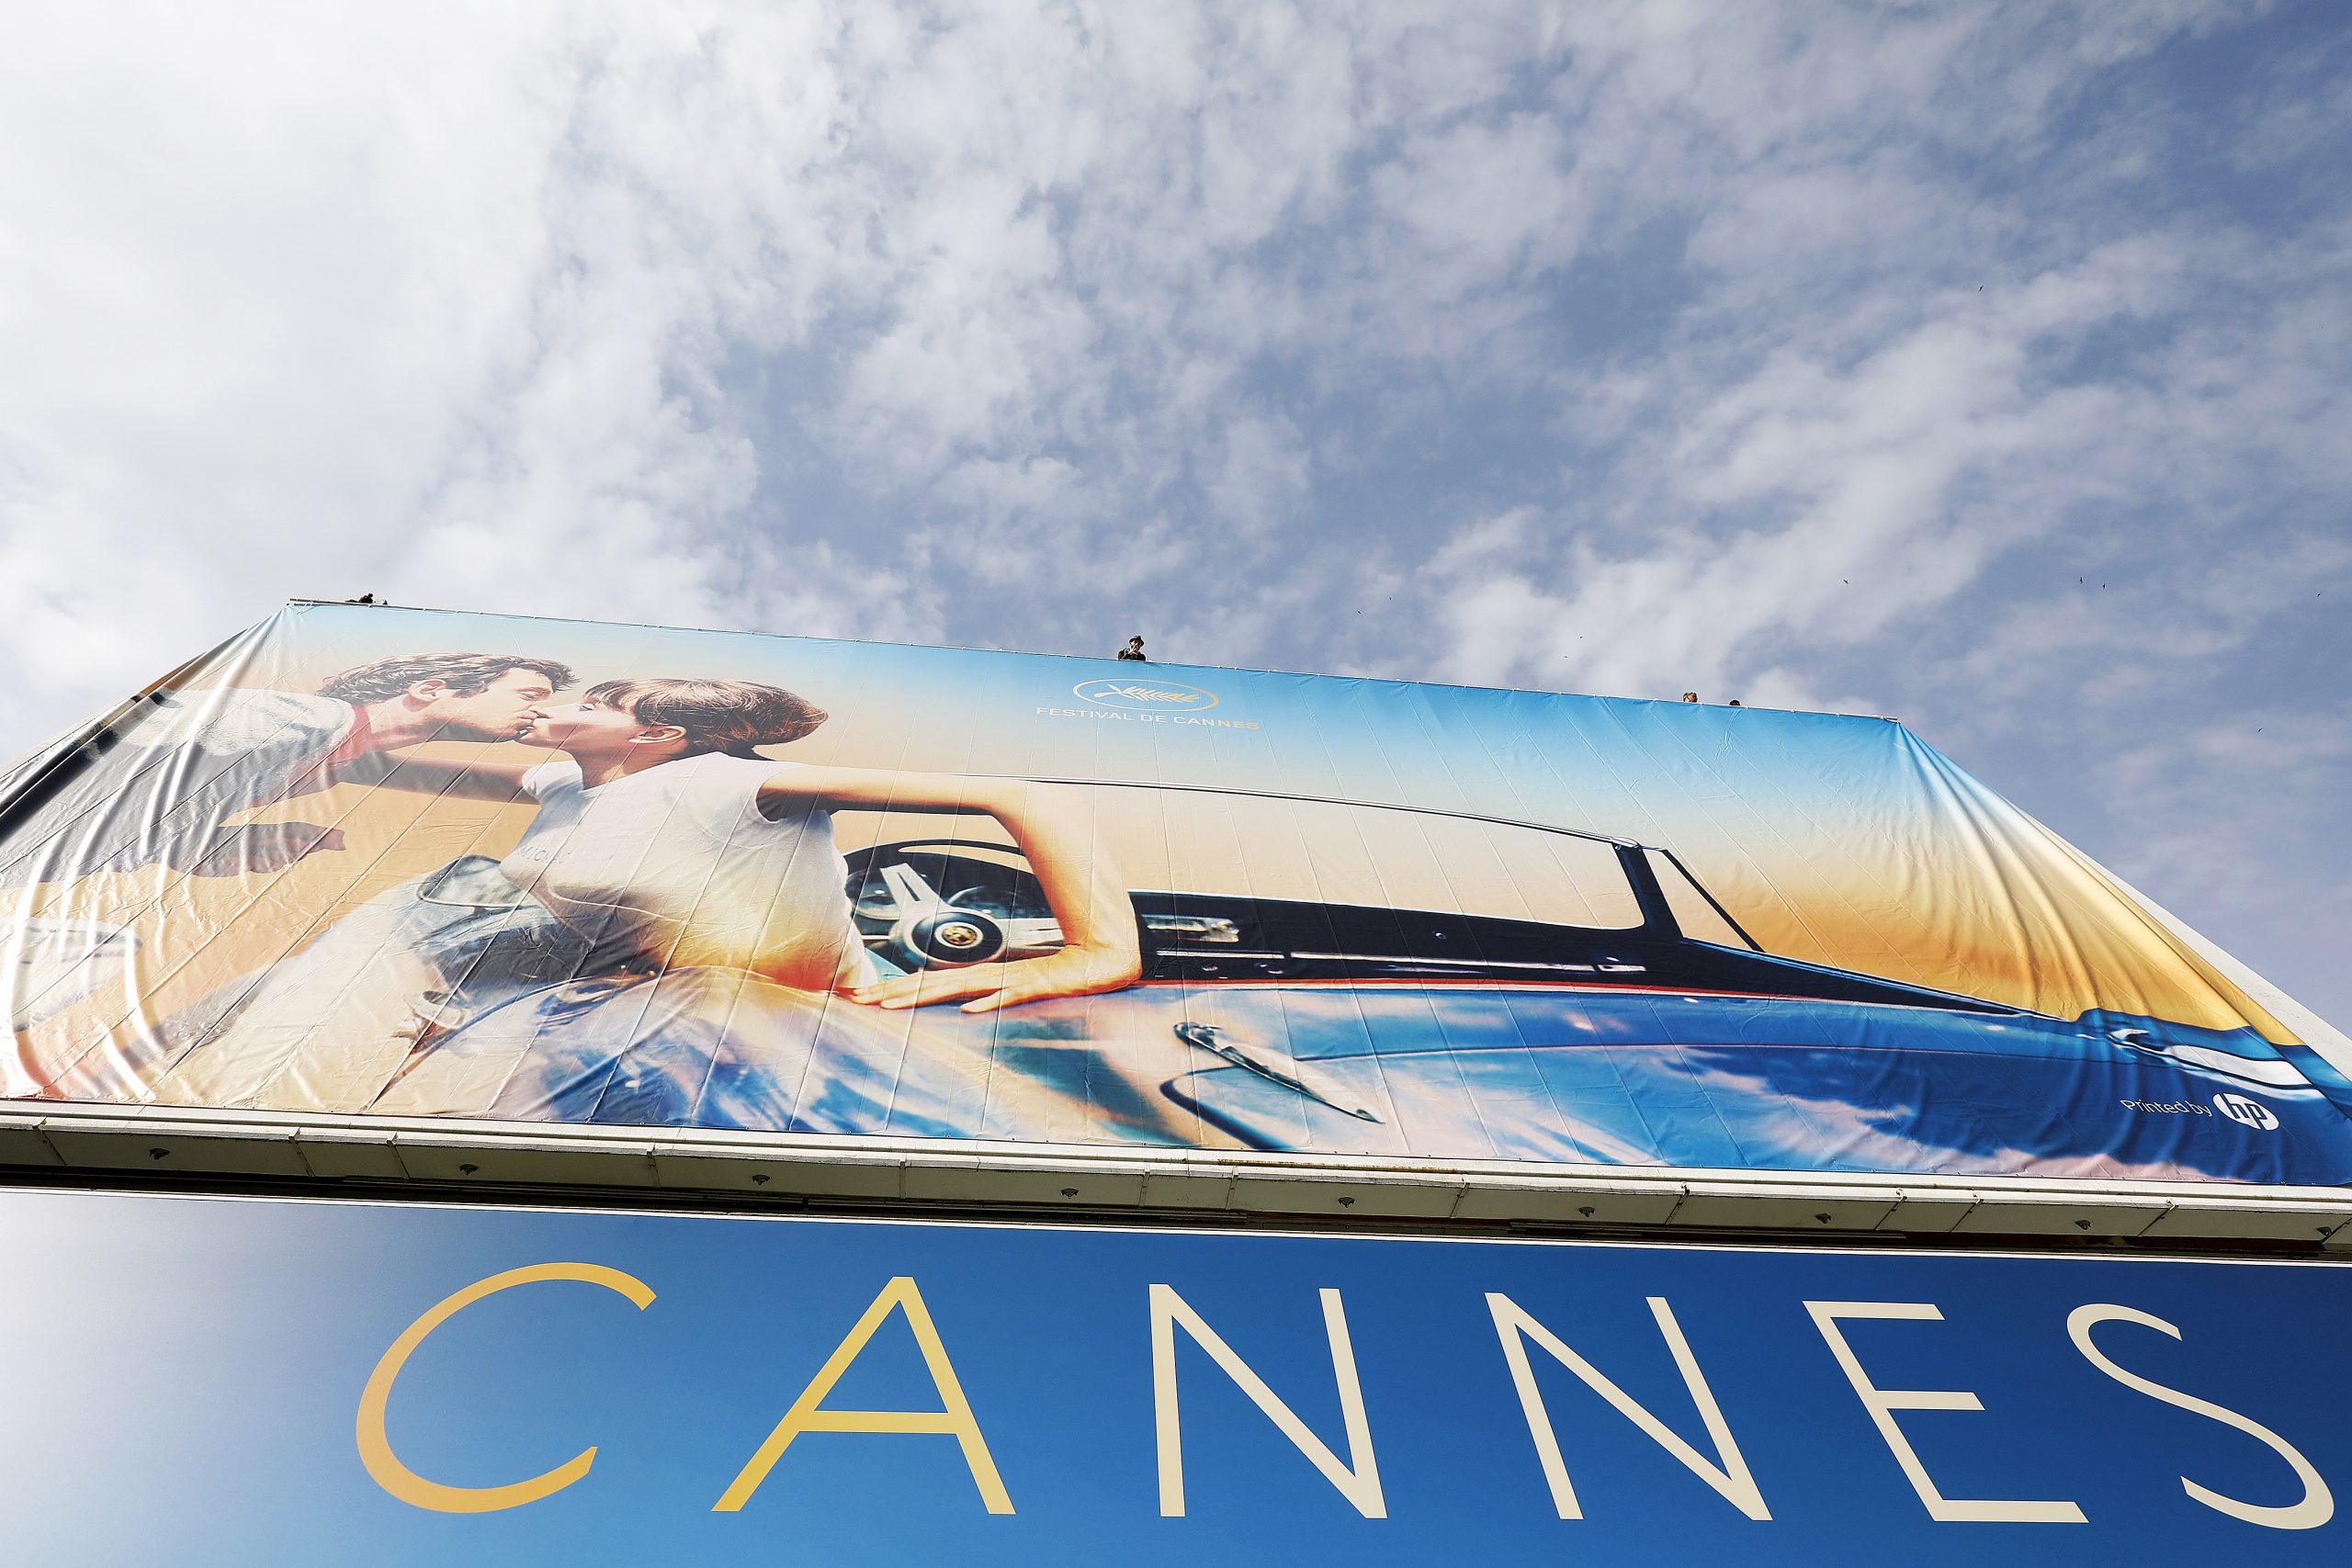 epa08969060 (FILE) - Workers set up the official poster of the 71st annual Cannes Film Festival on the Palais des Festivals facade, in Cannes, France, 06 May 2018 (reissued 27 January 2021). According to media reports, the Cannes Film Festival 2021 was cancelled, organizers announced. The Festival de Cannes, initially scheduled from 11 to 22 May 2021, will now take place from 06 to 17 July 2021.  EPA/SEBASTIEN NOGIER *** Local Caption *** 55967241